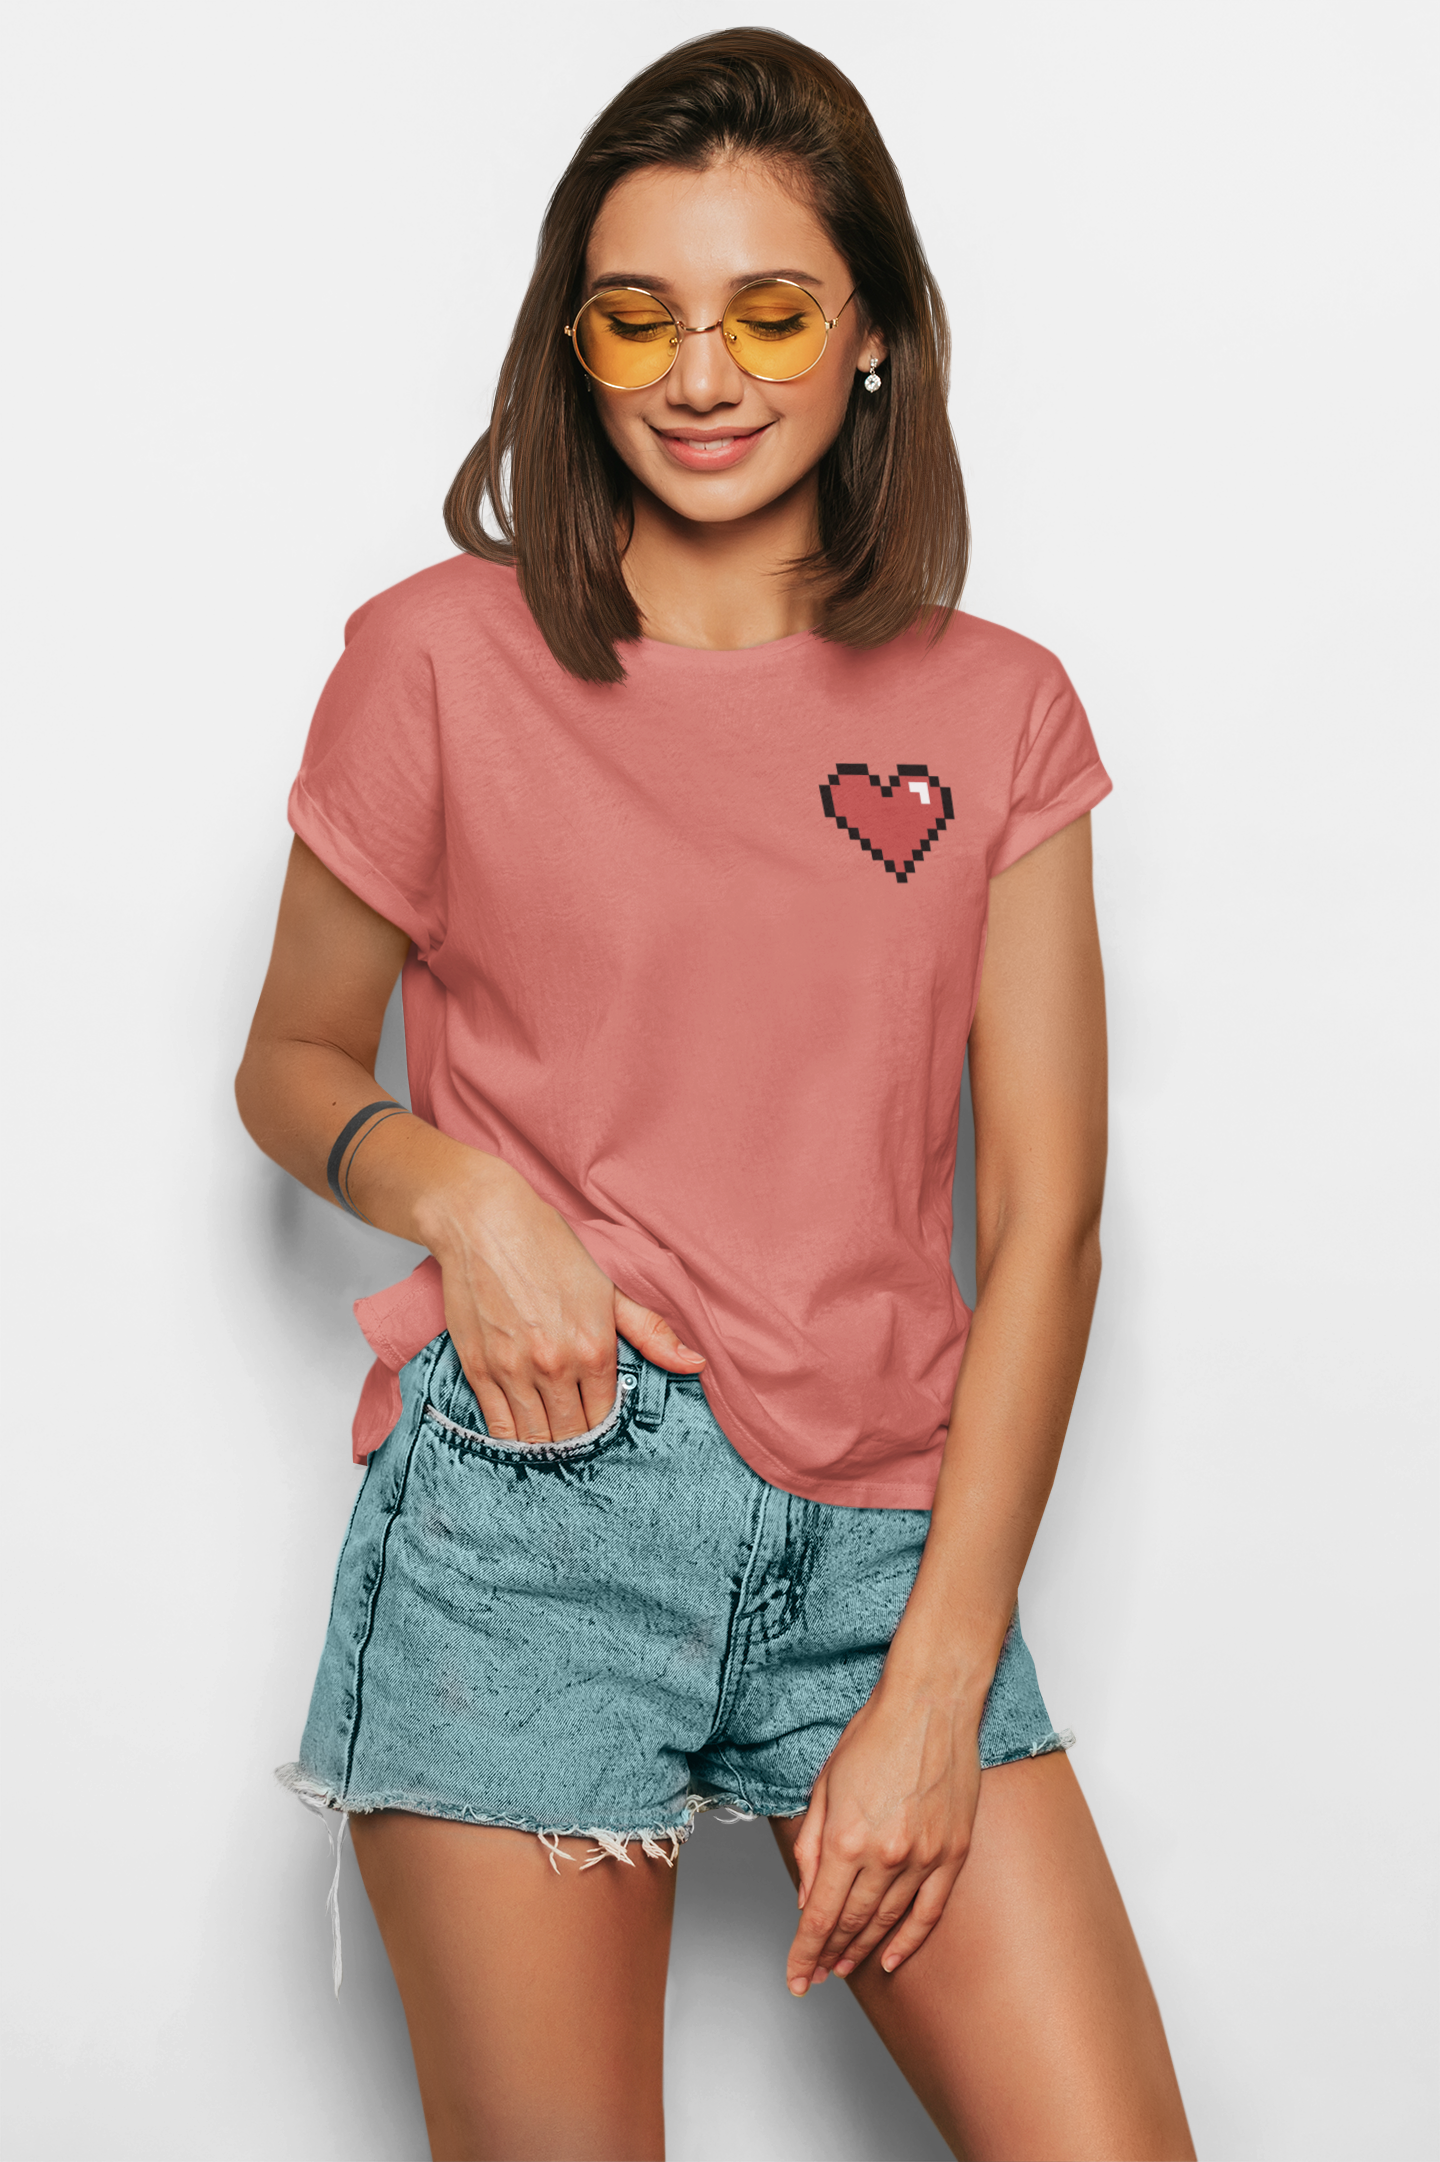 WOMEN'S T-SHIRT PINK: HEART AT TOP RIGHT